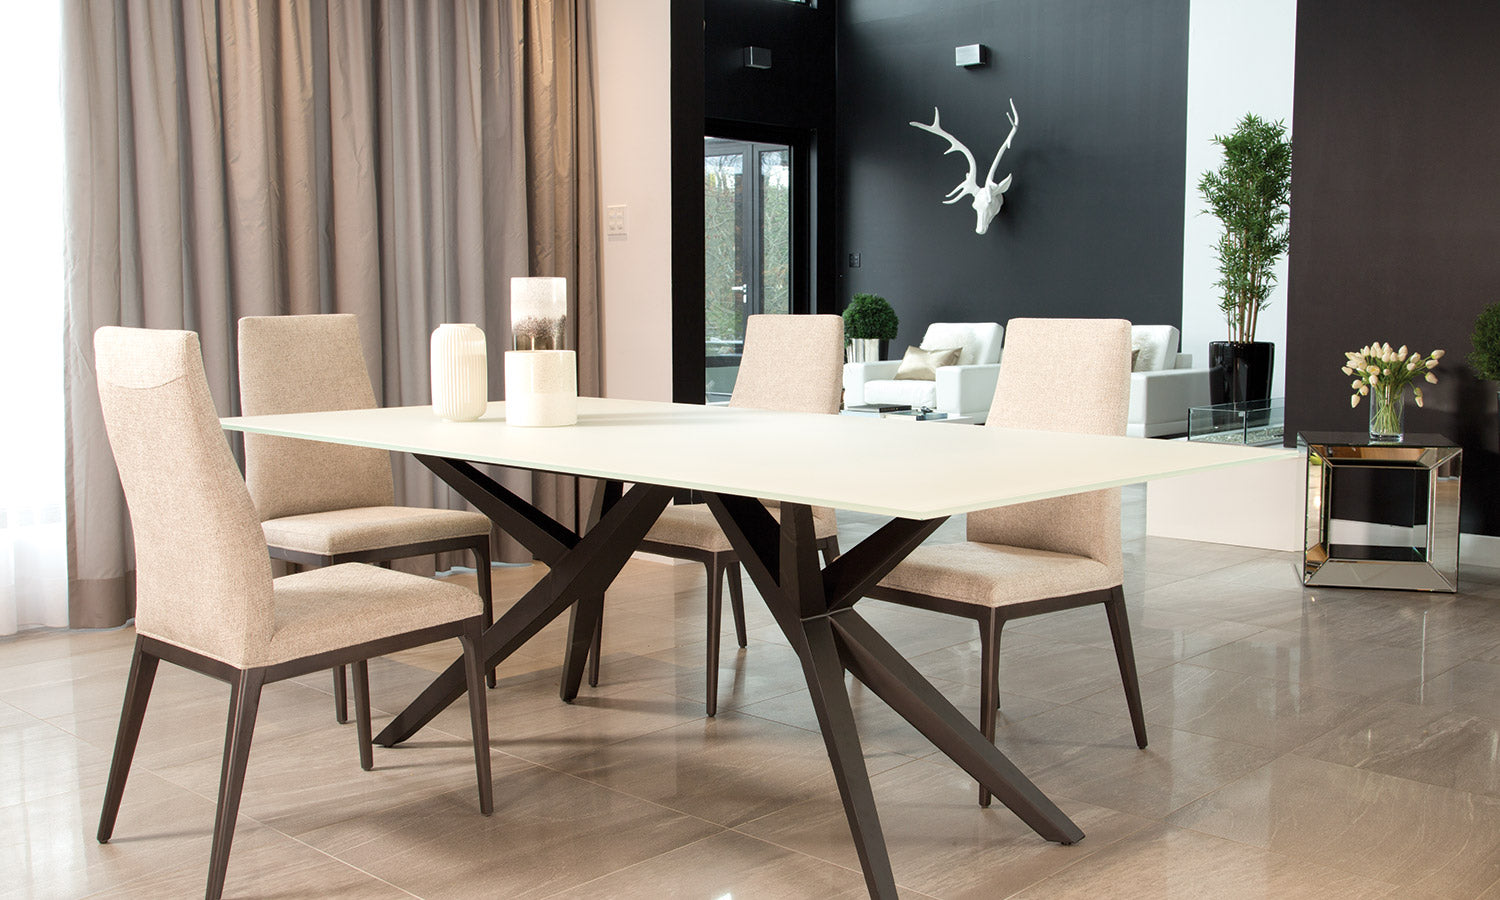 TERRA DINING TABLE